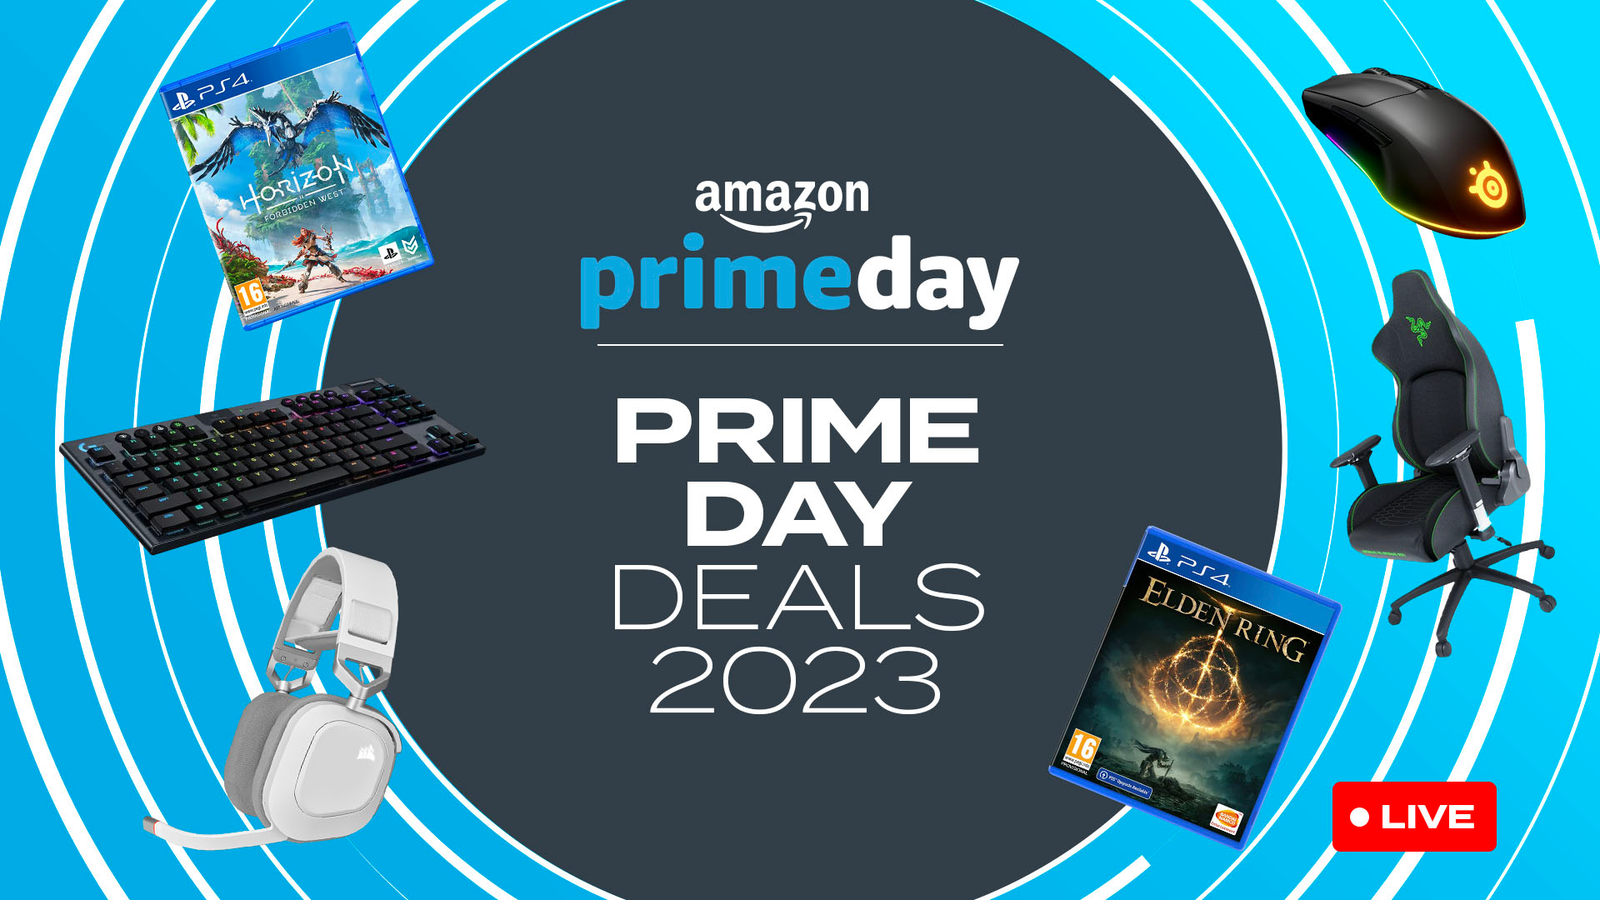 https://assetsio.reedpopcdn.com/Jelly_Deals_Prime-Day_Live_2023_AW.jpg?width=1600&height=900&fit=crop&quality=100&format=png&enable=upscale&auto=webp